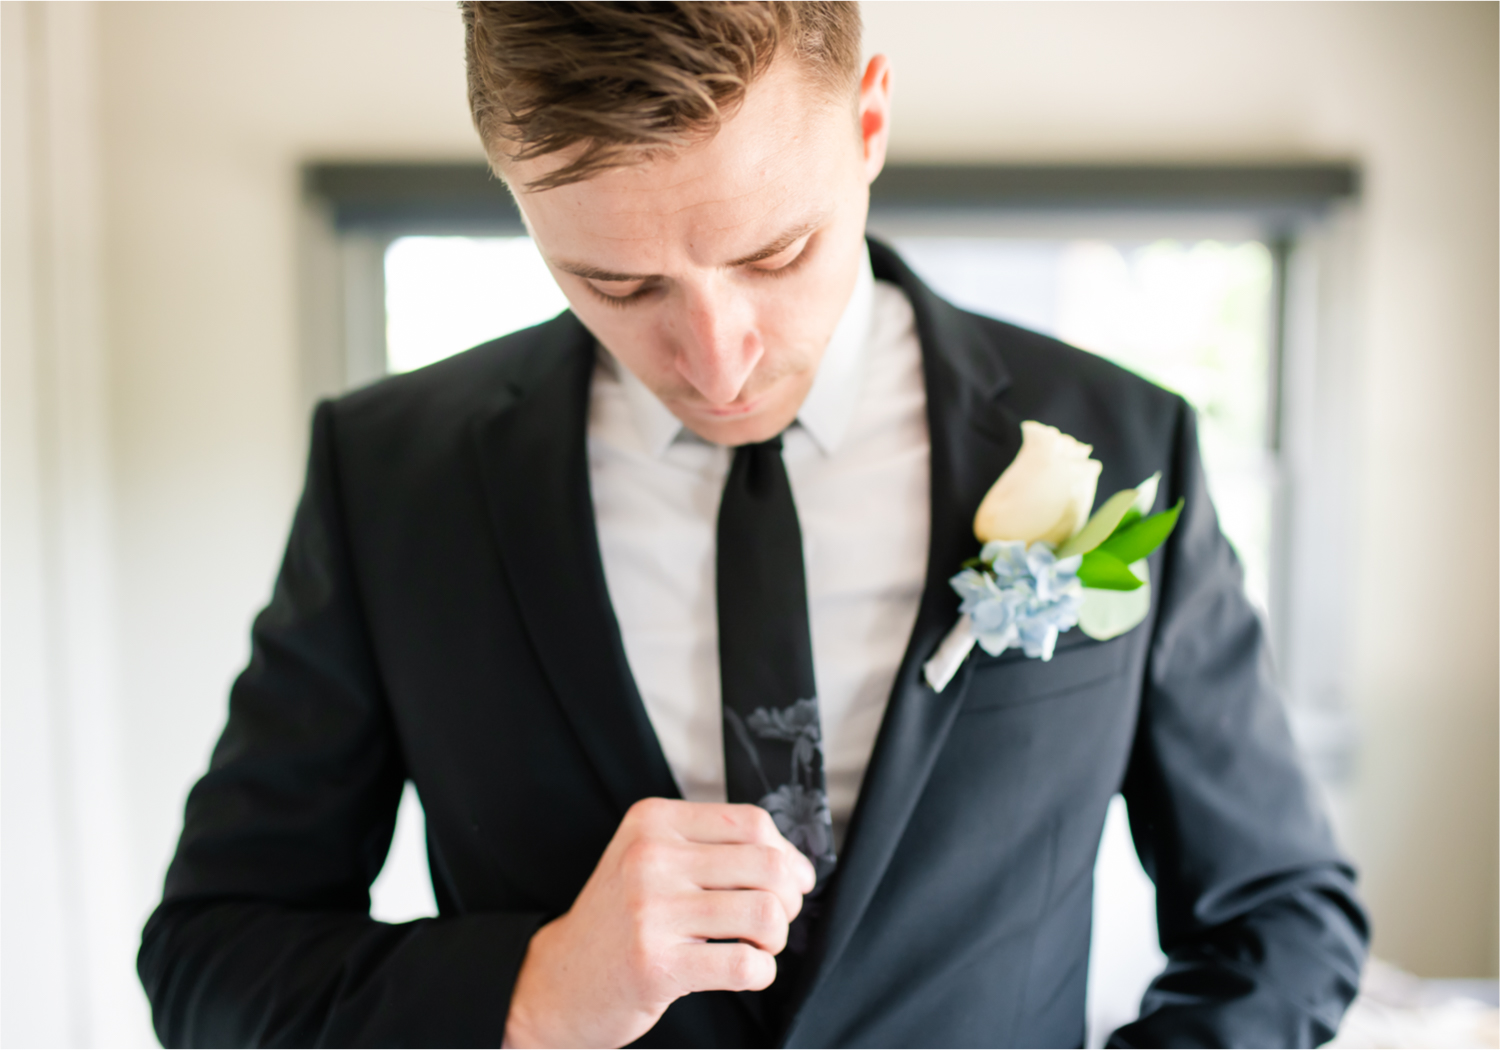 Romantic and Rustic Wedding at The Mill in Windsor | Britni Girard Photography | Colorado based wedding photography and videography team | Groom portraits | Royal Blue and White Wedding | Groomsmen attire from Express